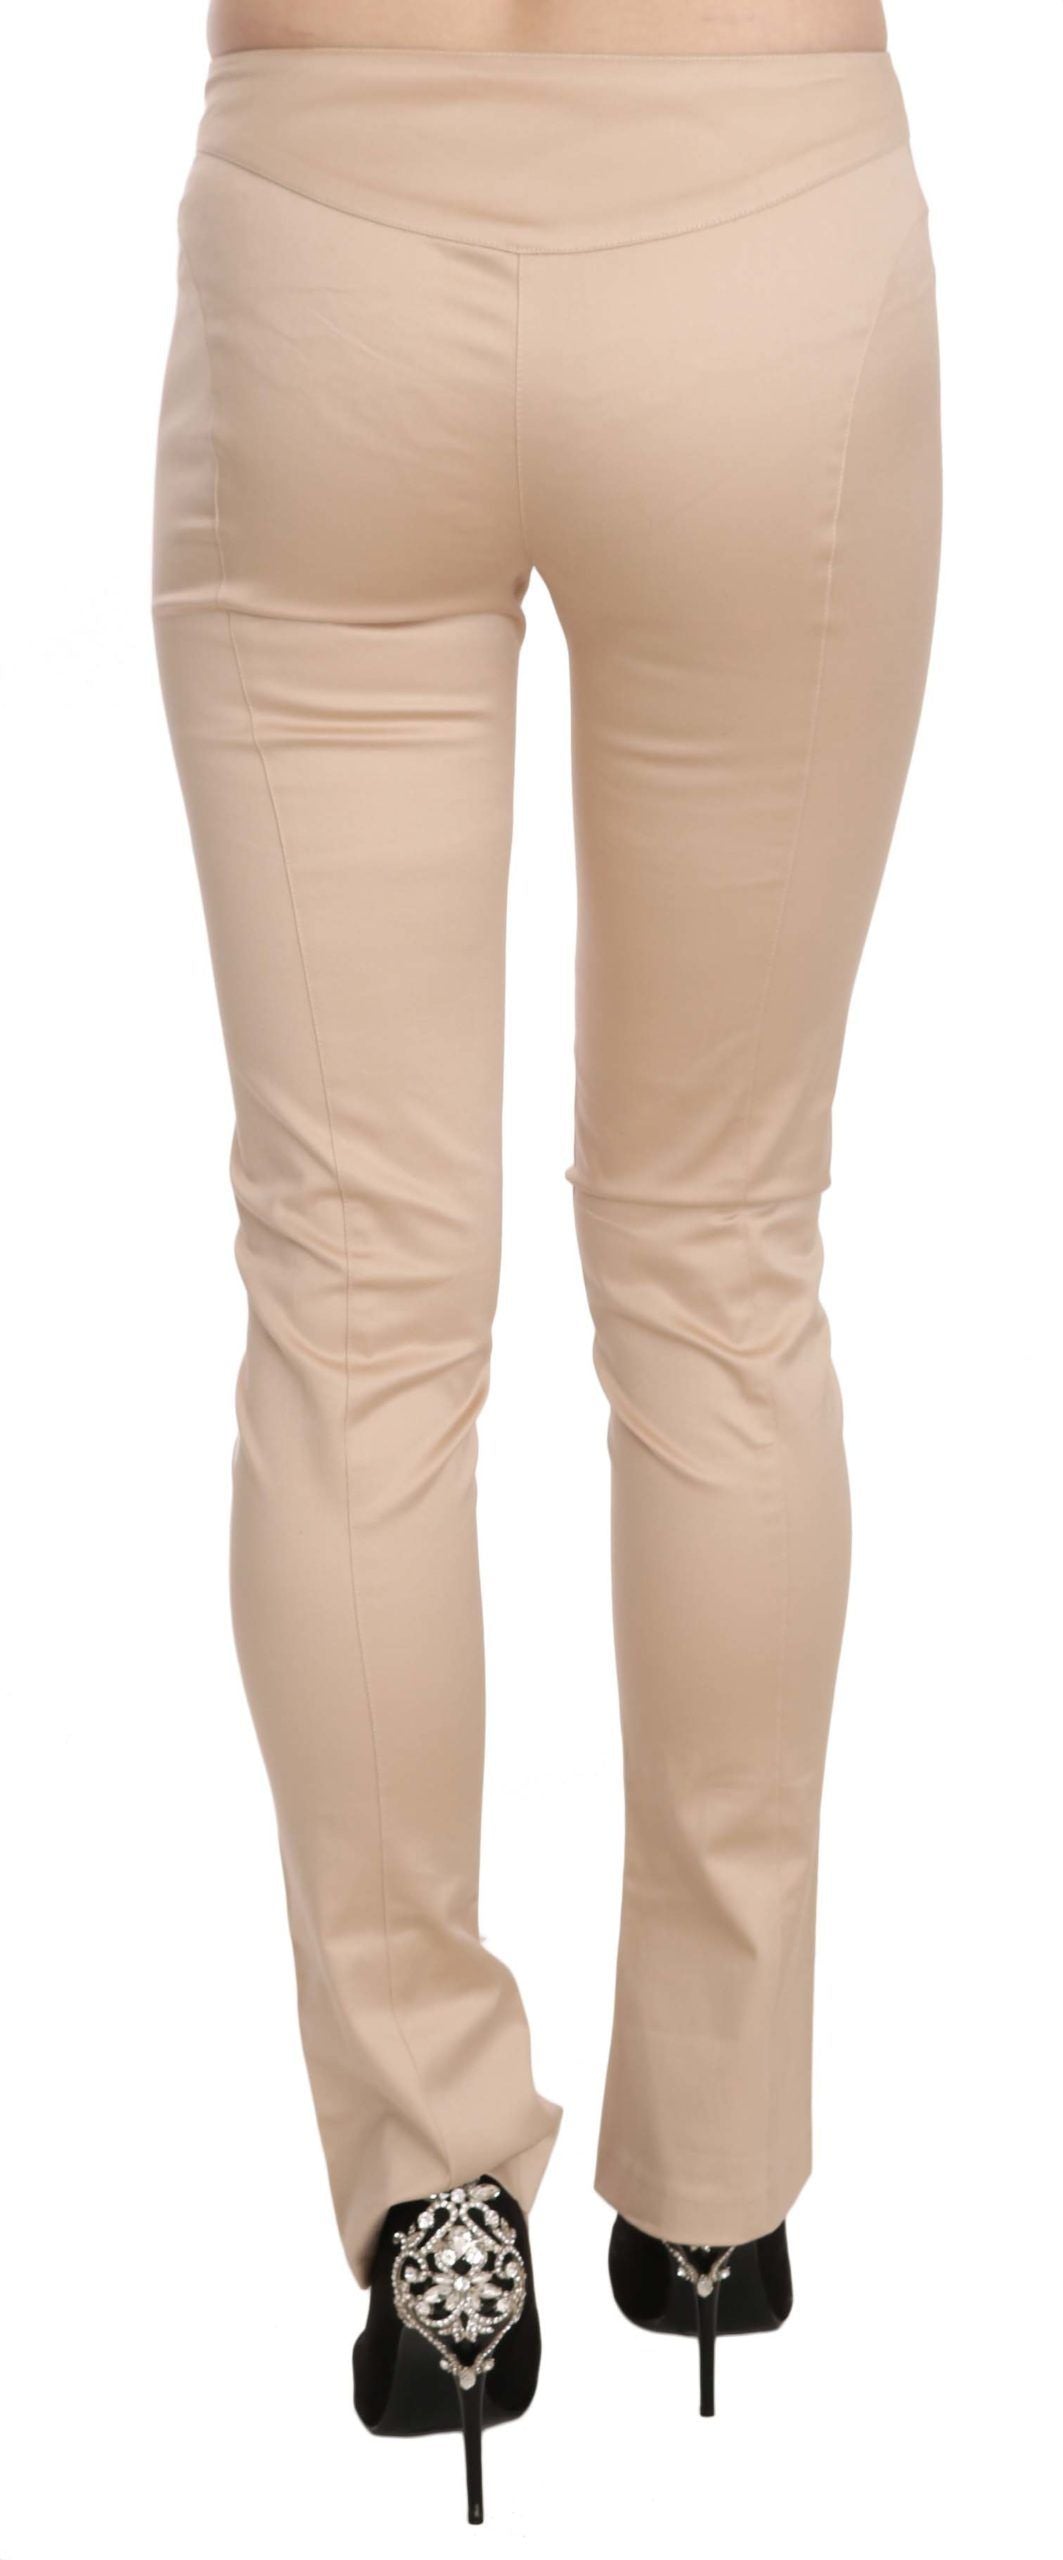 Cream Low Waist Skinny Formal Trousers Pants - Designed by Just Cavalli Available to Buy at a Discounted Price on Moon Behind The Hill Online Designer Discount Store